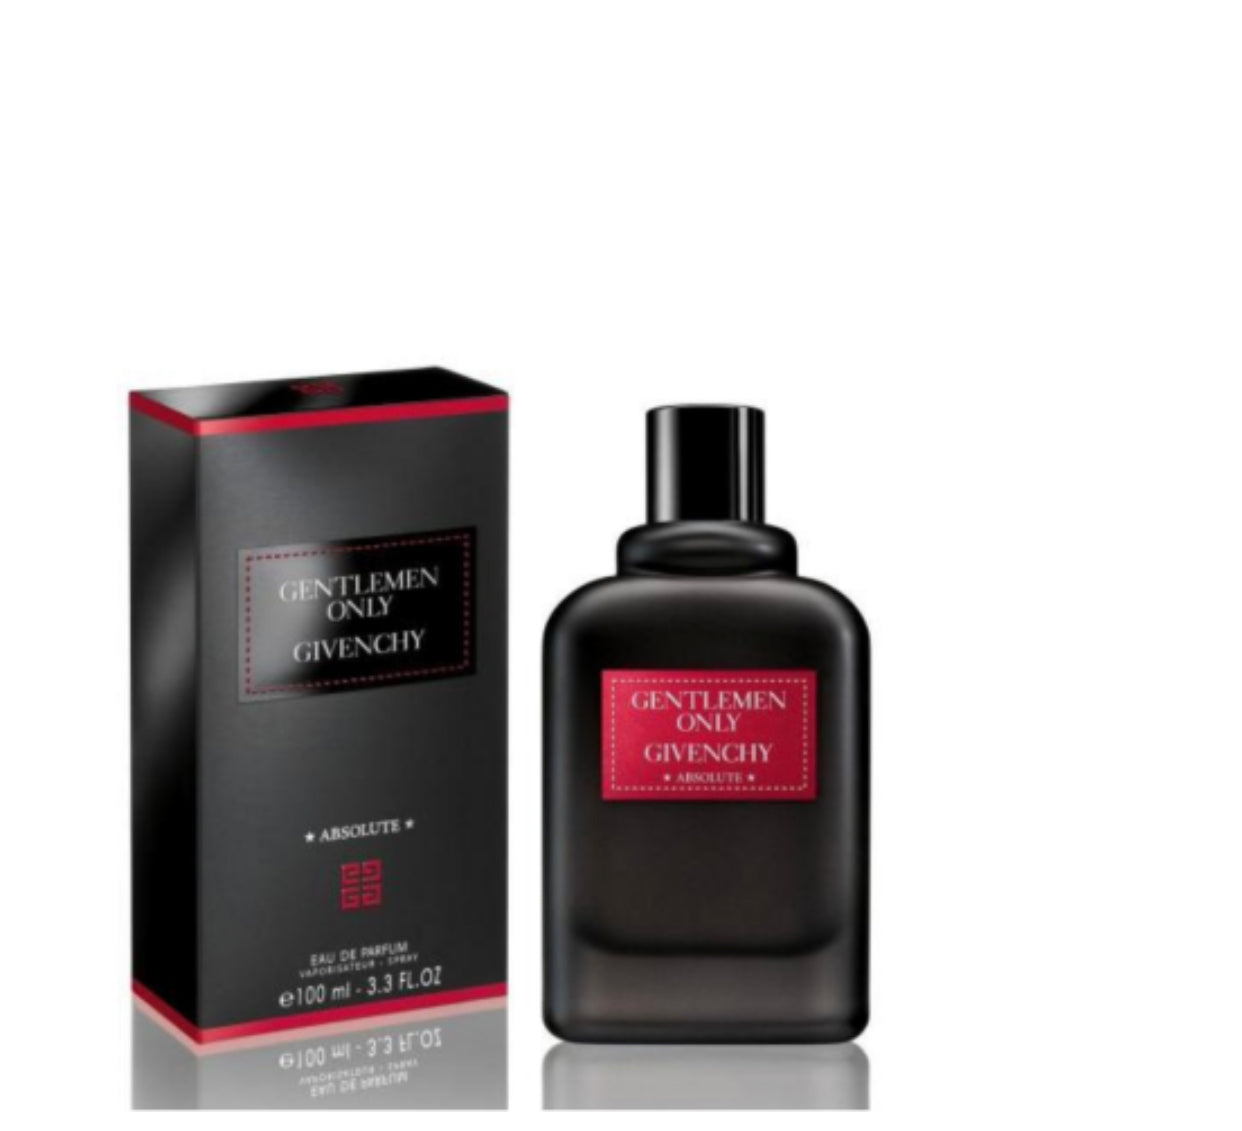 Givenchy Gentlemen only absolute,100ml. Givenchy only absolute. Givenchy Gentlemen only absolute. Givenchy Gentlemen only Casual Chic.